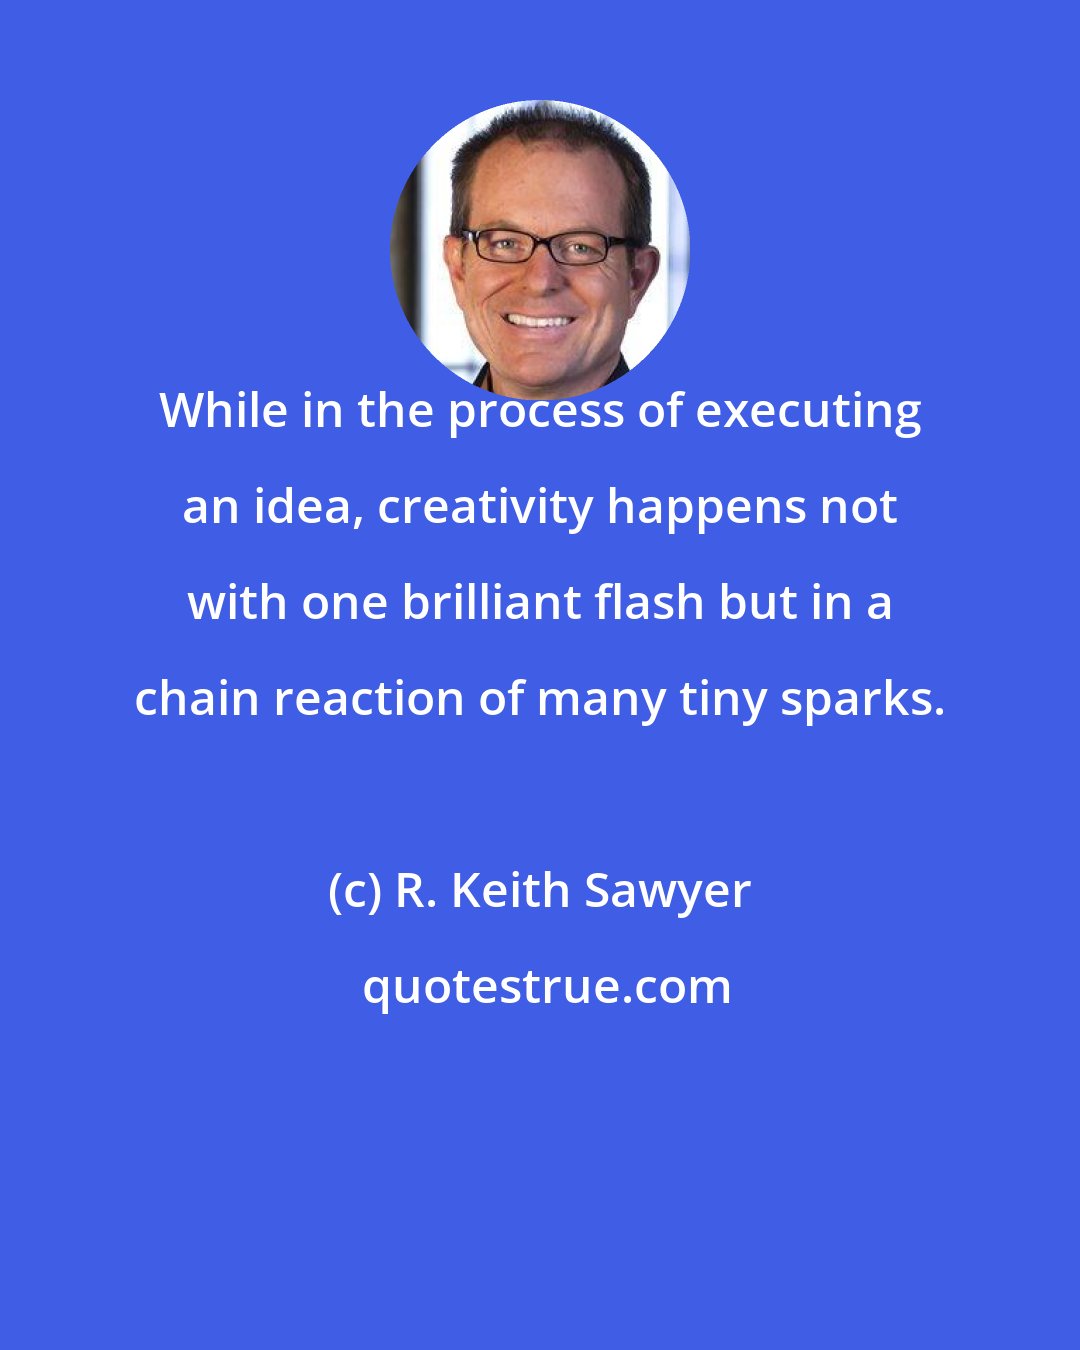 R. Keith Sawyer: While in the process of executing an idea, creativity happens not with one brilliant flash but in a chain reaction of many tiny sparks.